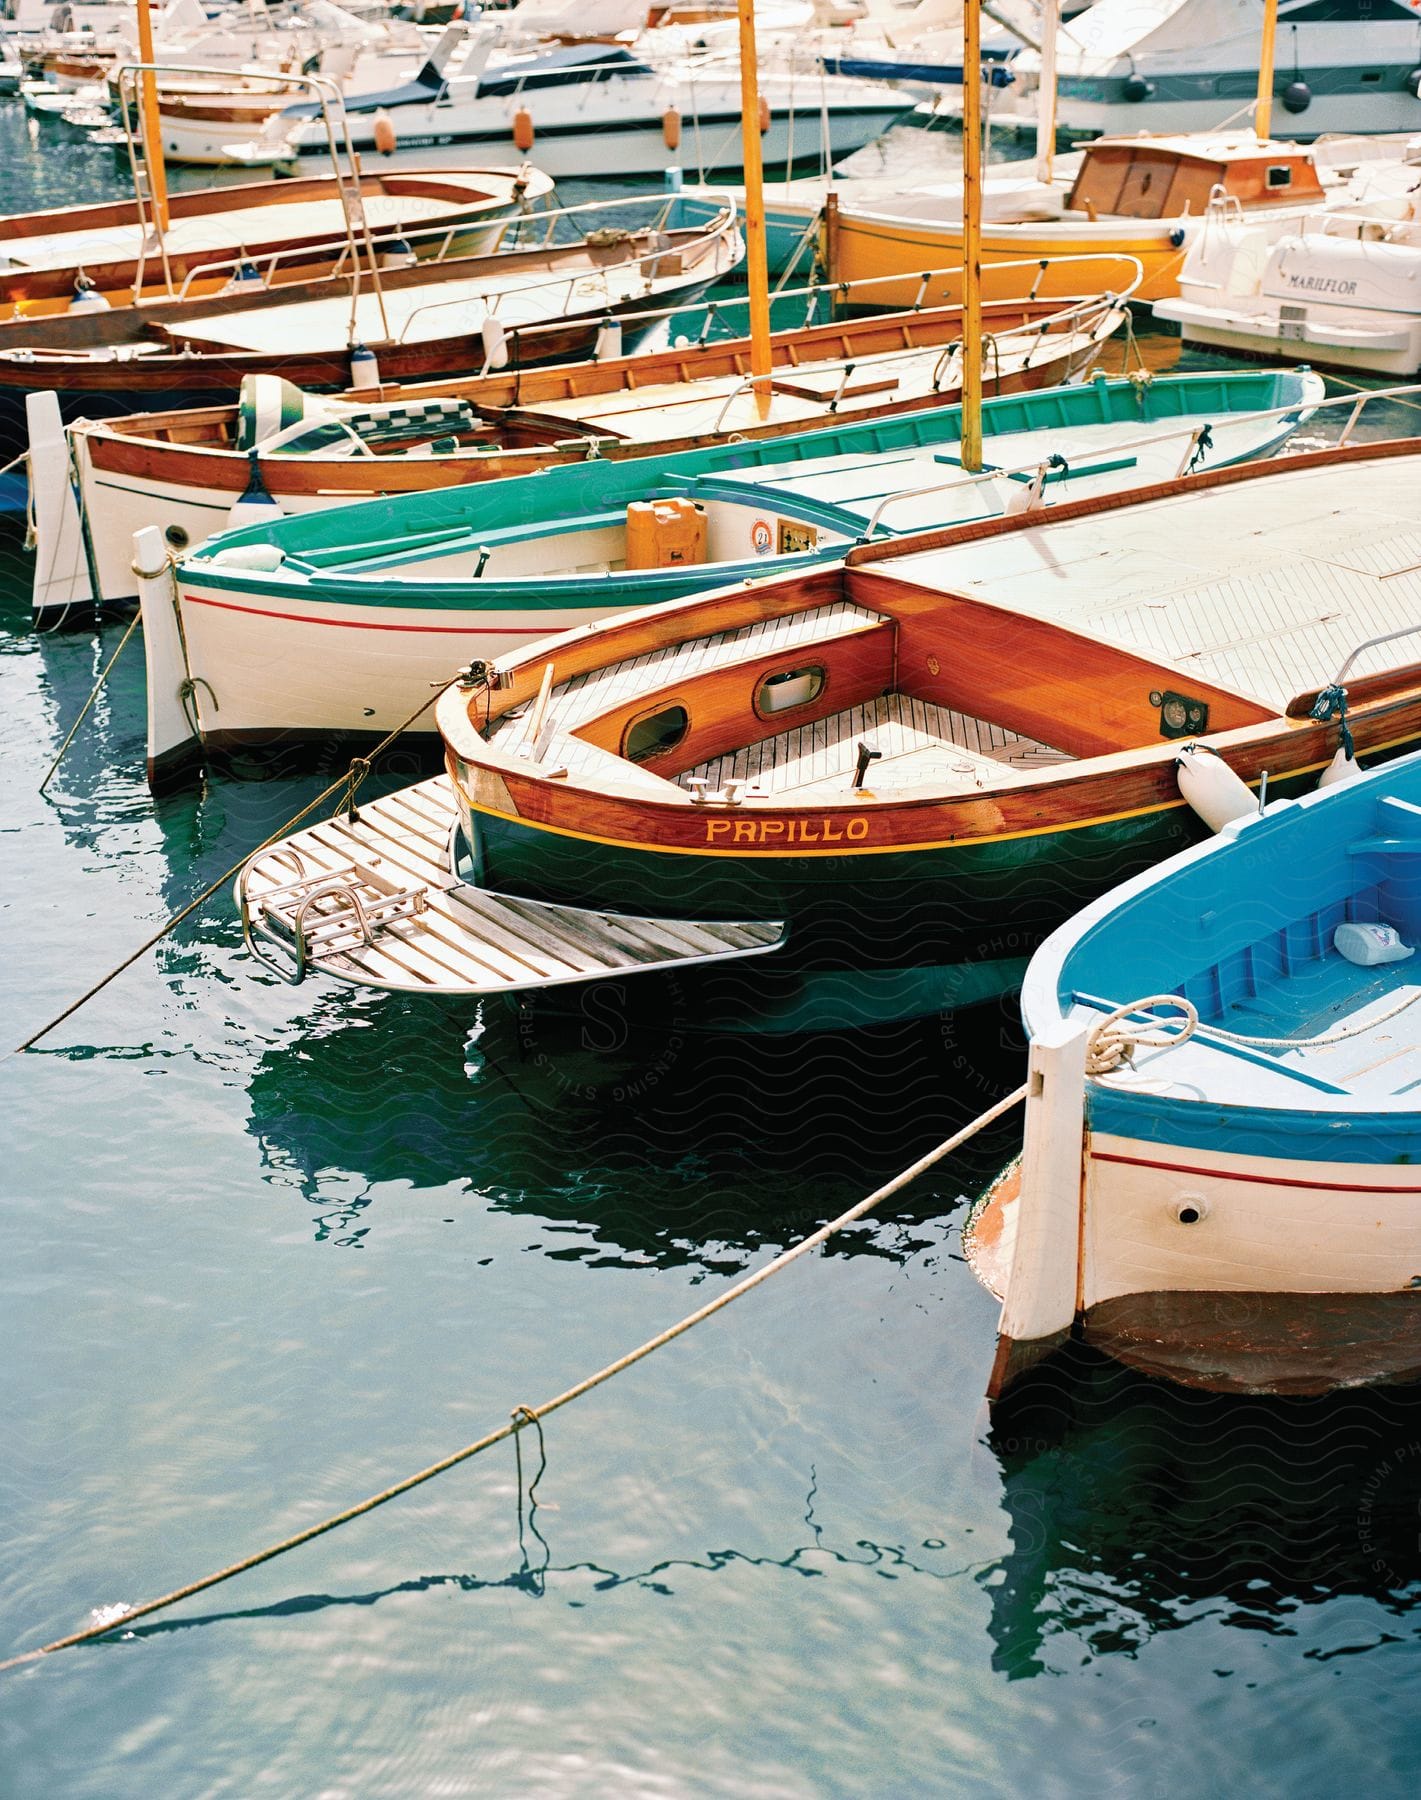 A series of boats docked on shore